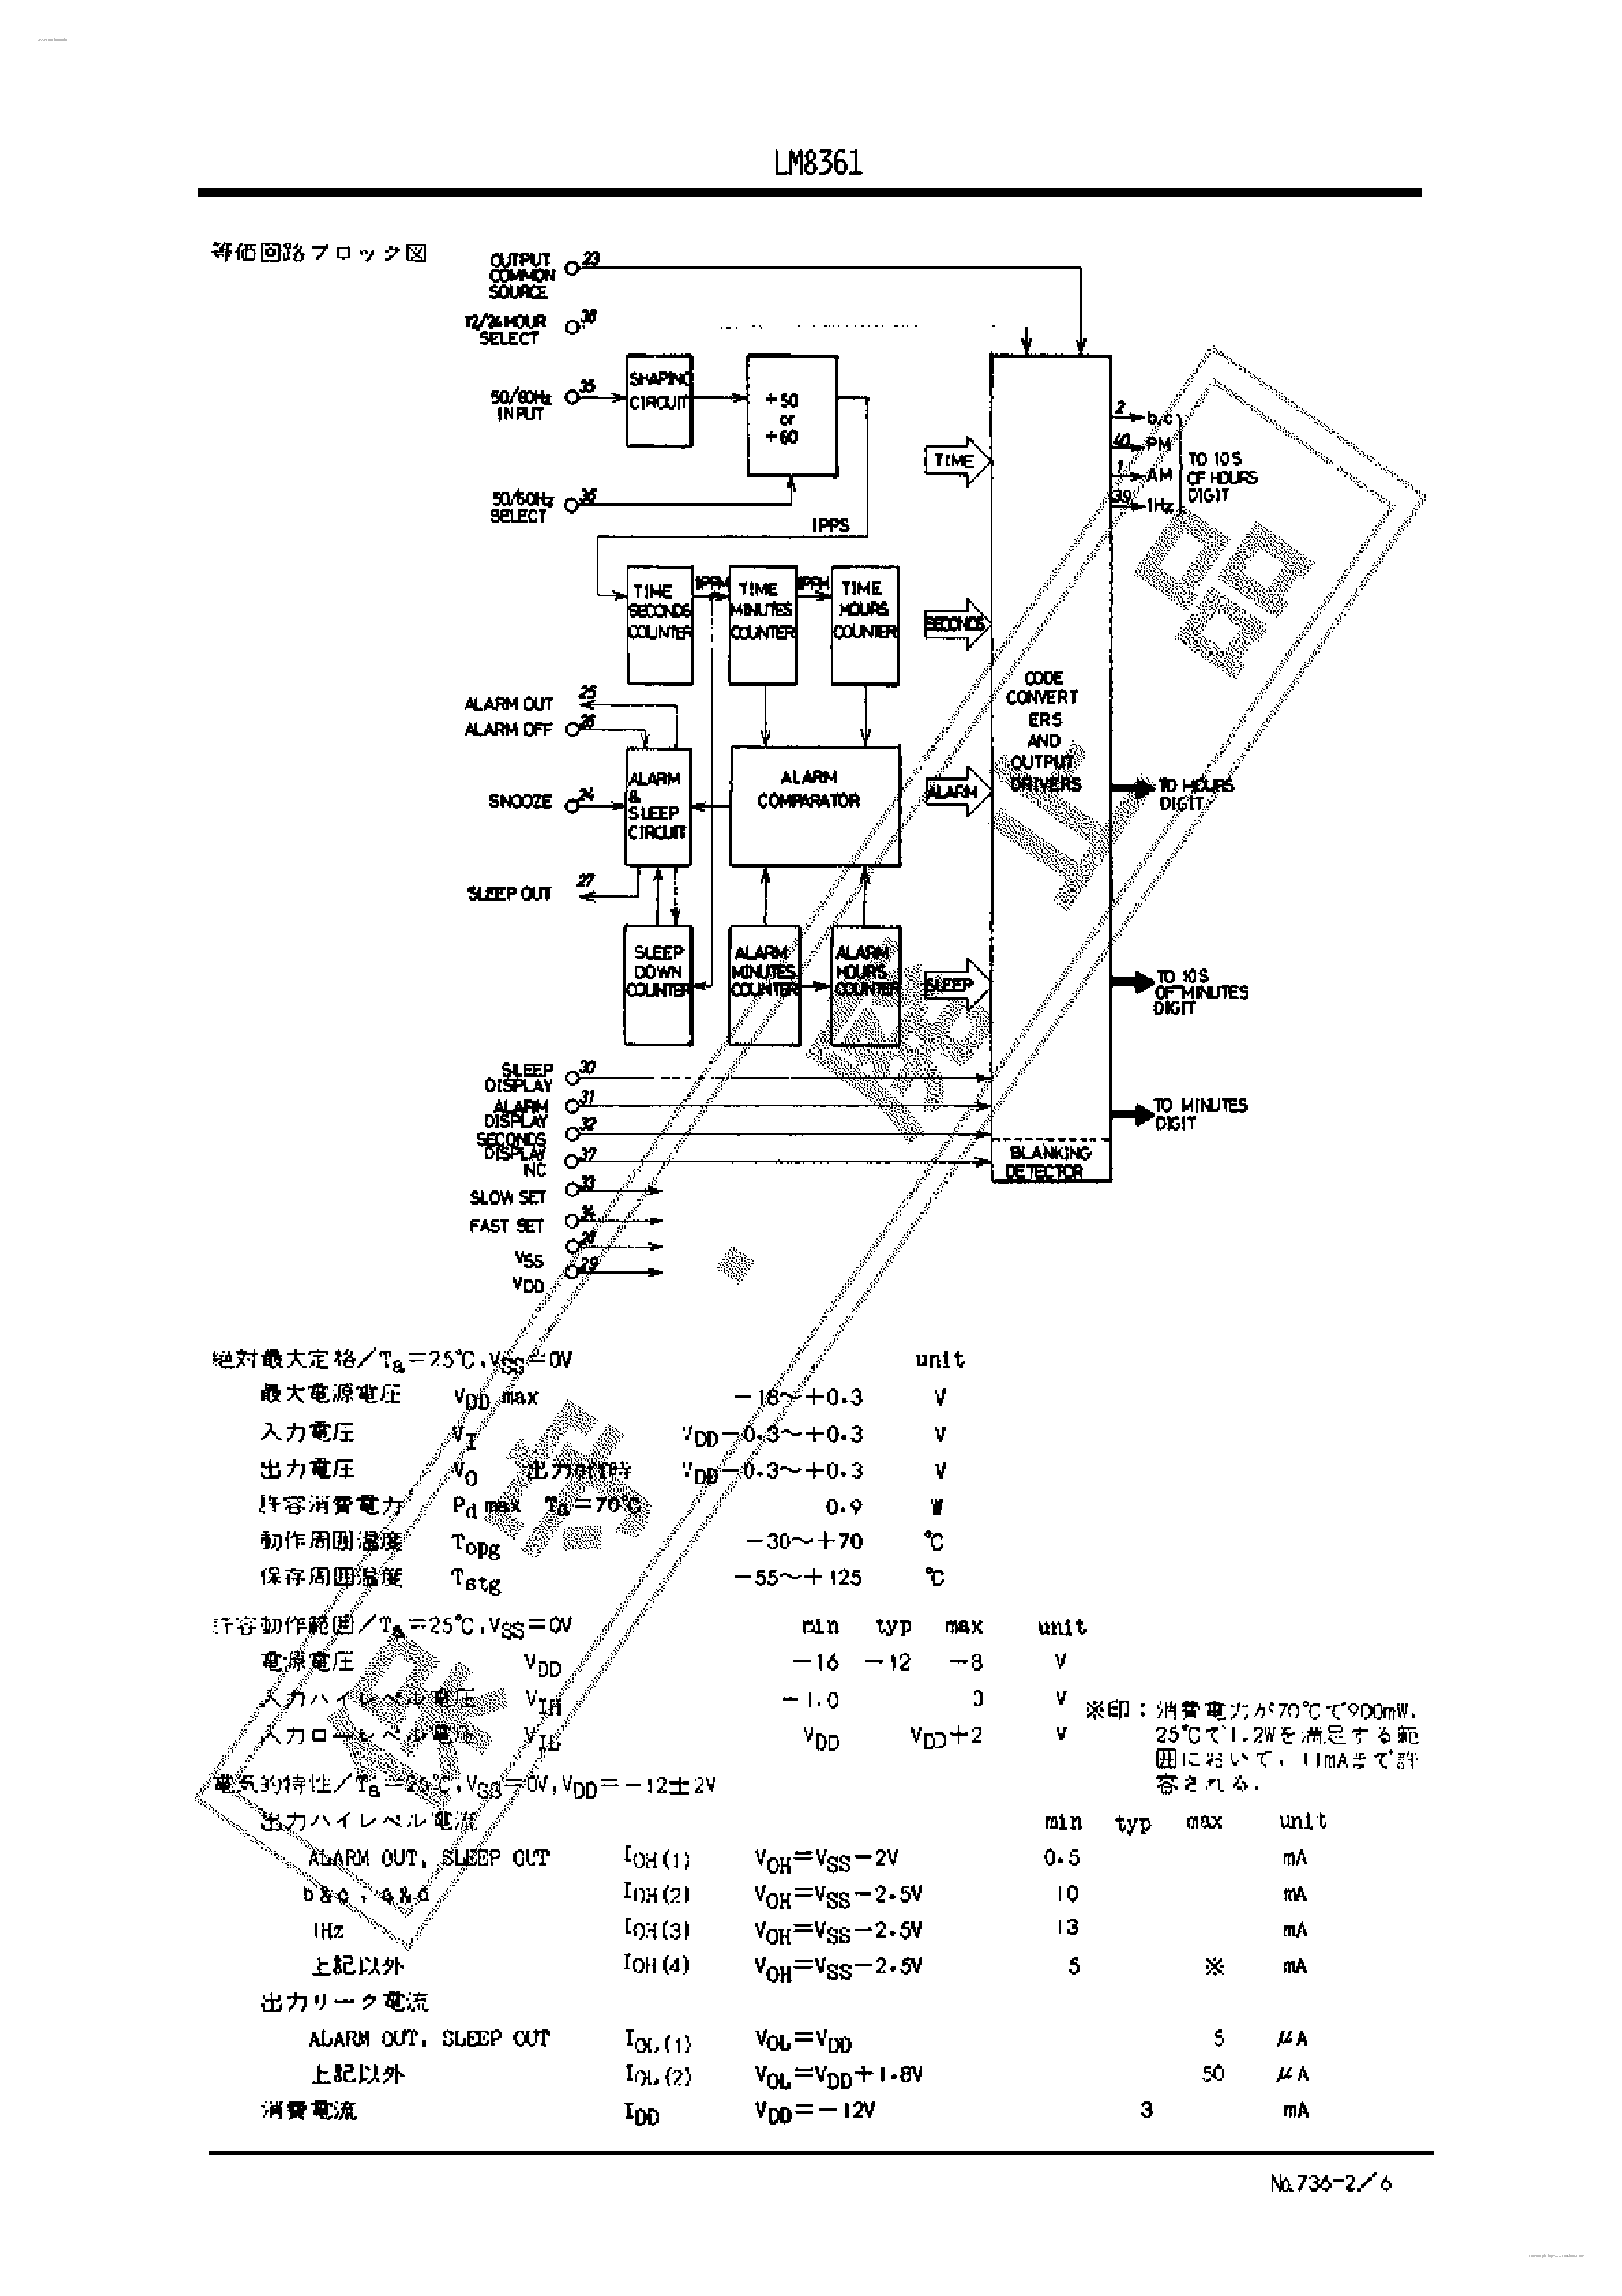 Datasheet LM8361 - Watches / Clocks page 2